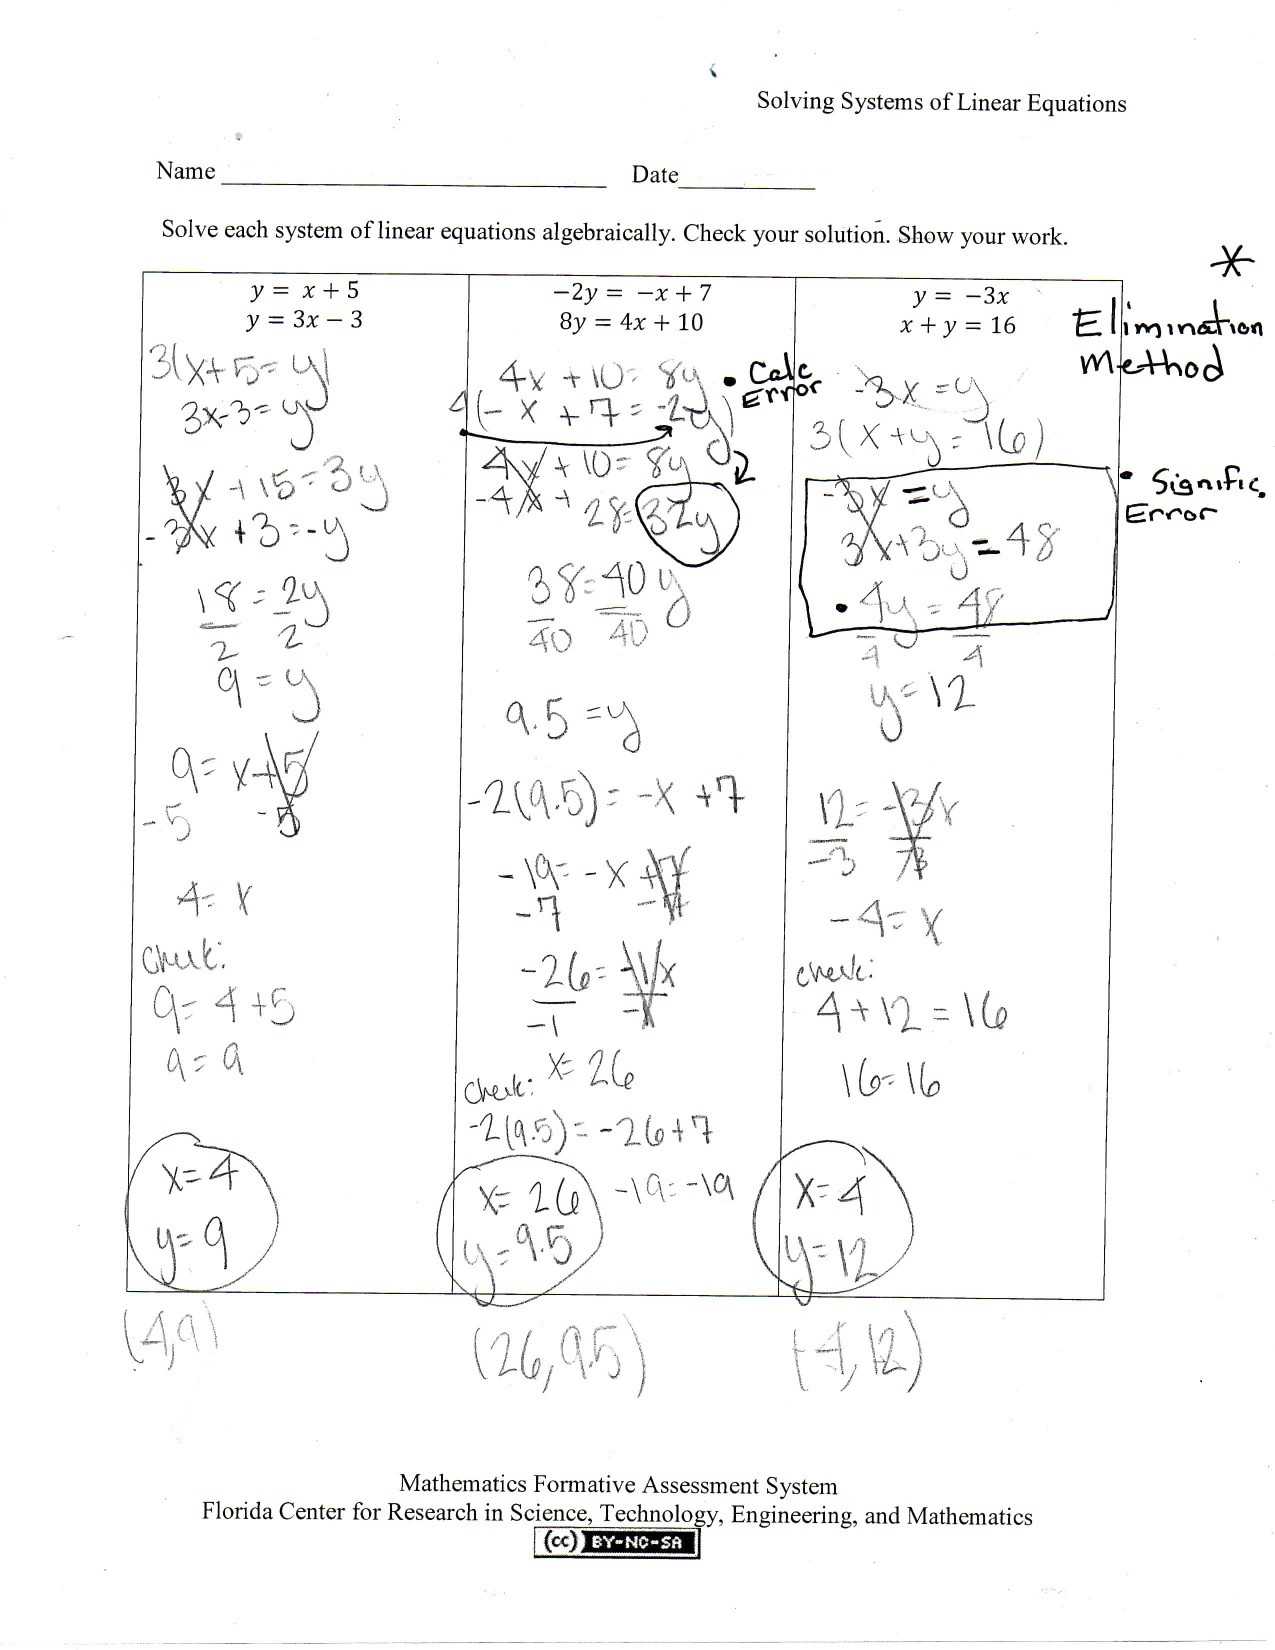 Solving Inequalities Worksheet as Well as solving Systems Equations Worksheet with Answers Gallery